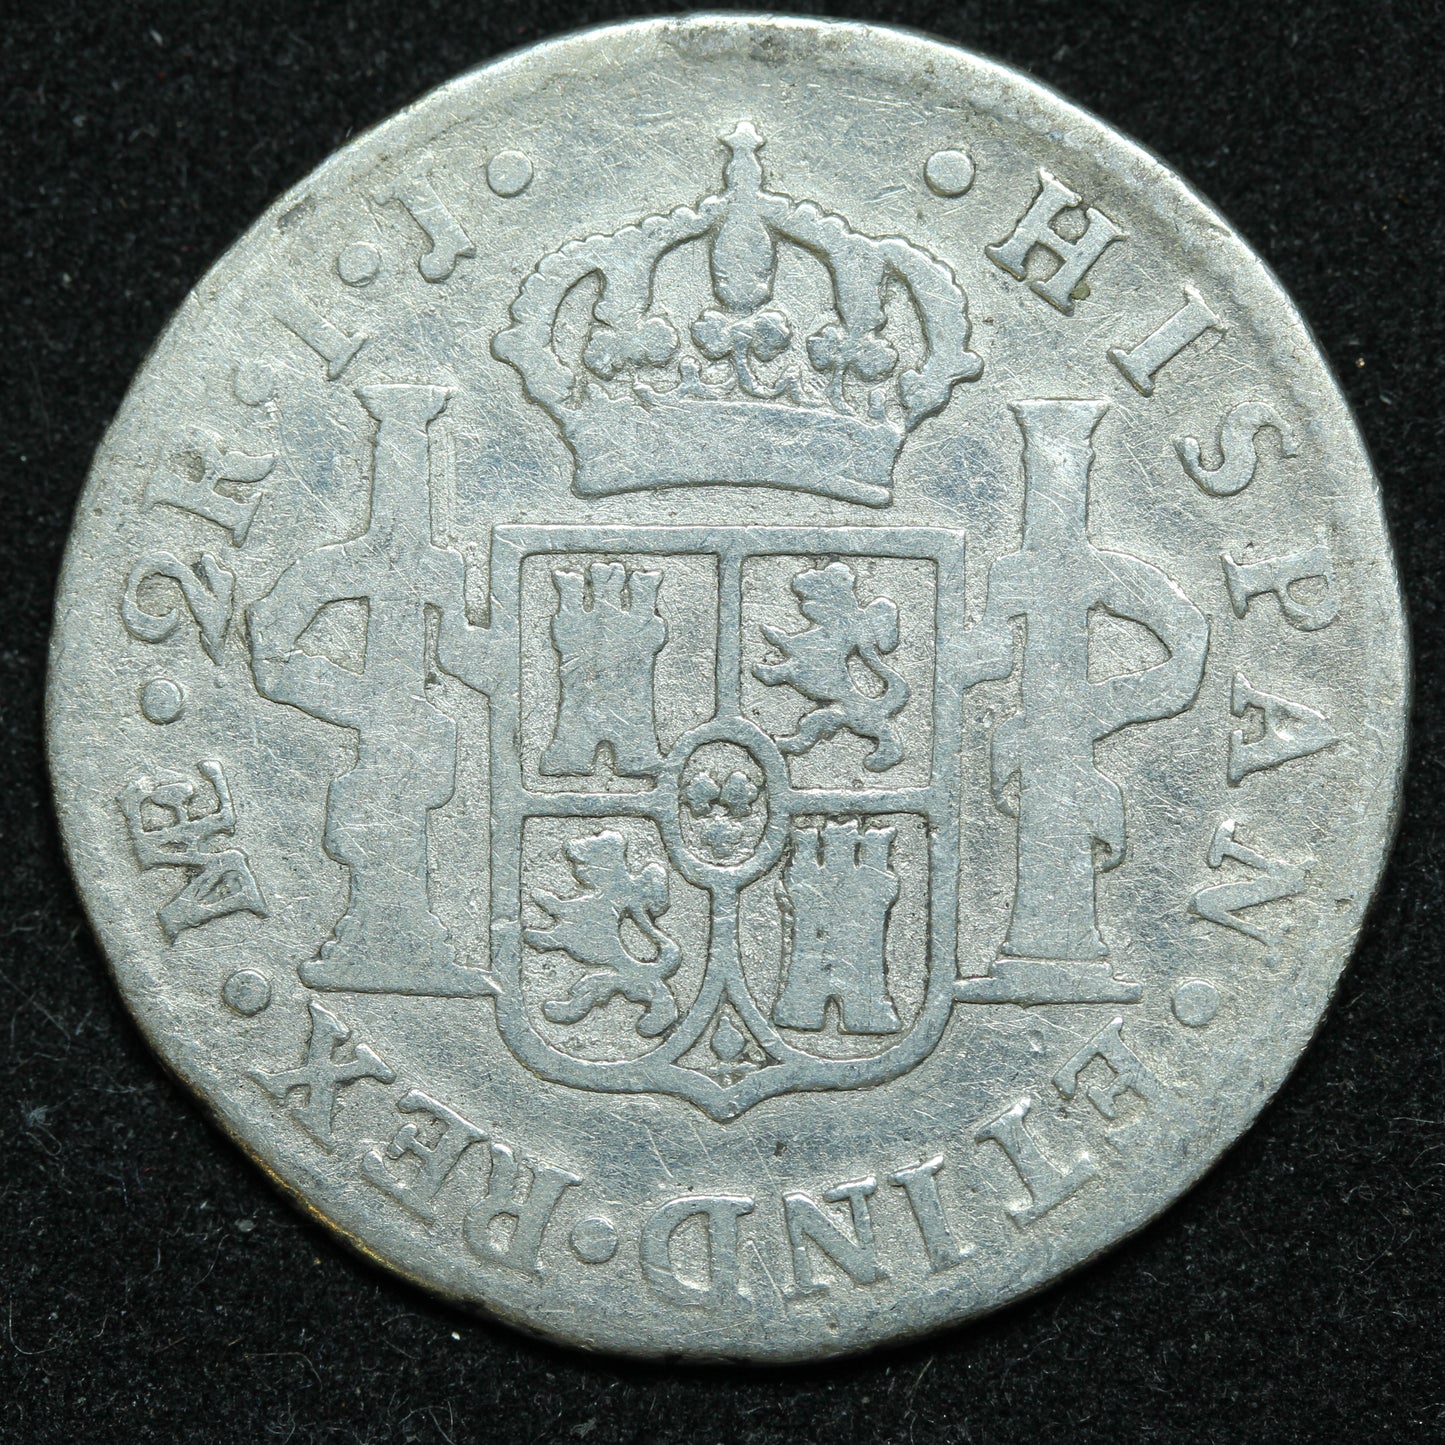 1802 2 Reales IJ Lima Peru Silver Coin - KM# 95